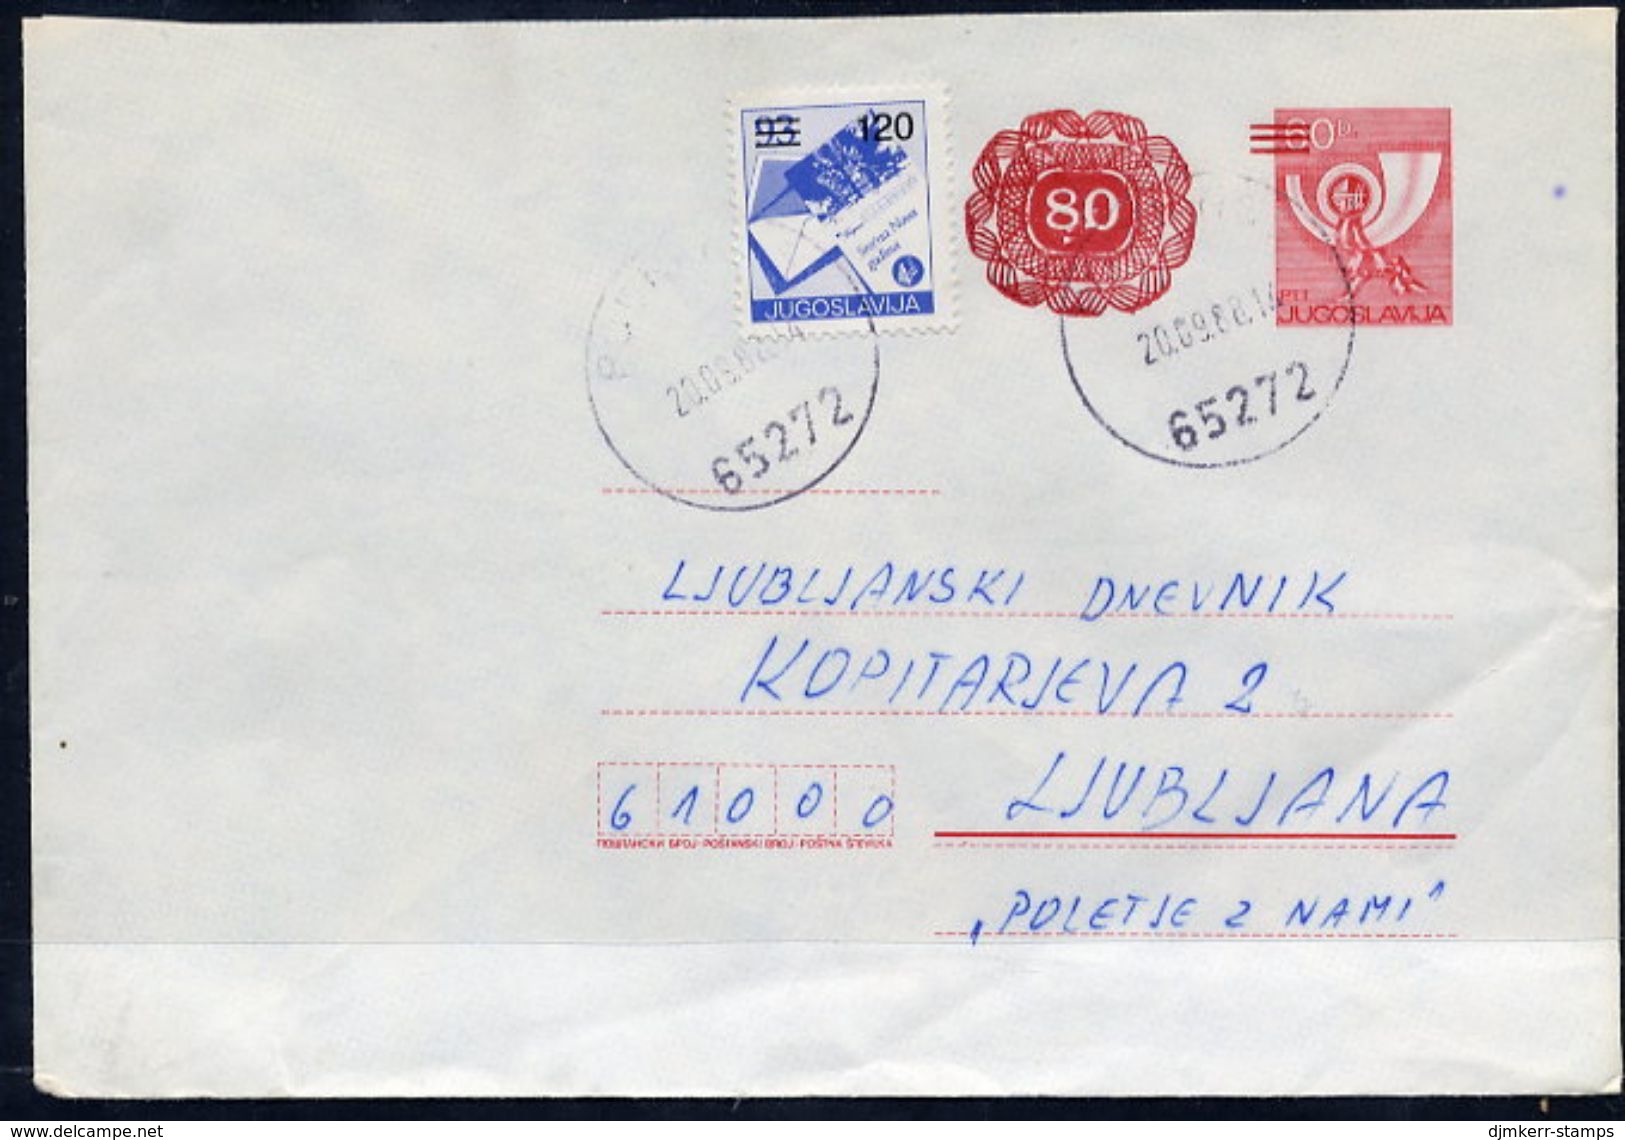 YUGOSLAVIA 1987 Posthorn 80/60 D.stationery Envelope  Used With Additional Franking.  Michel U78 - Entiers Postaux